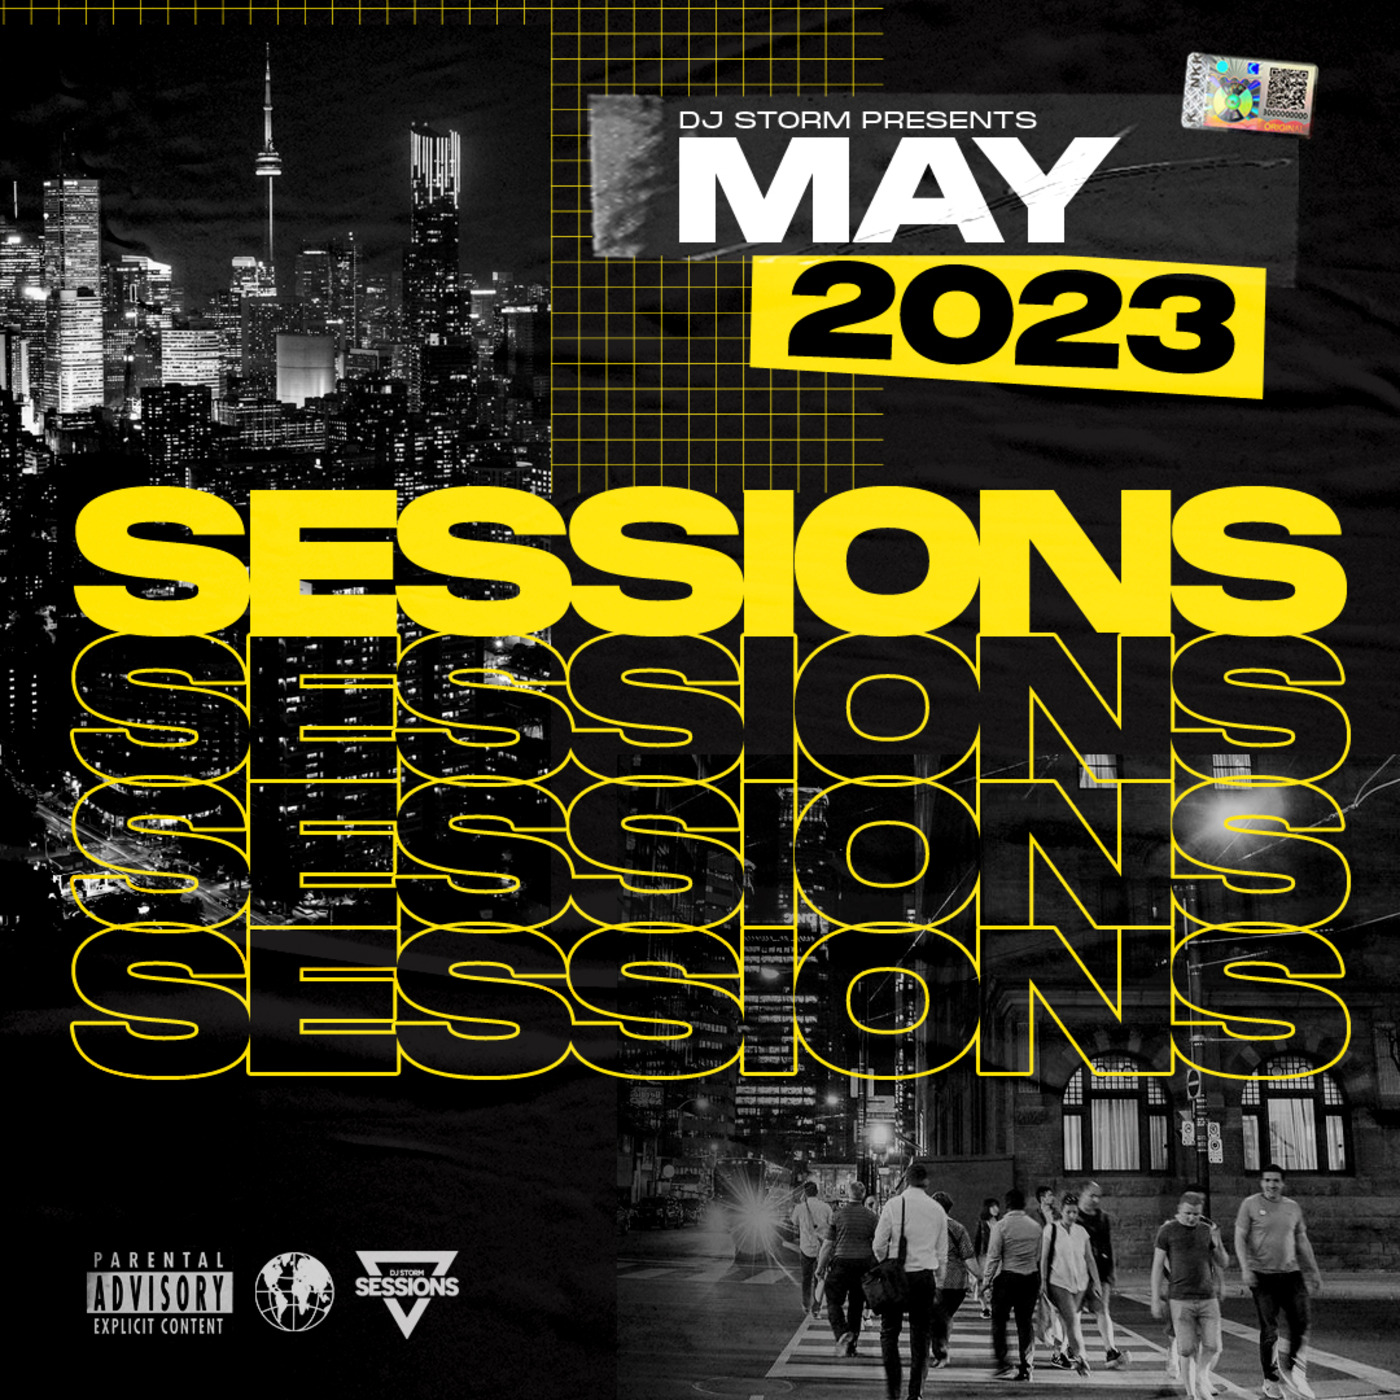 The Sessions: May 2023